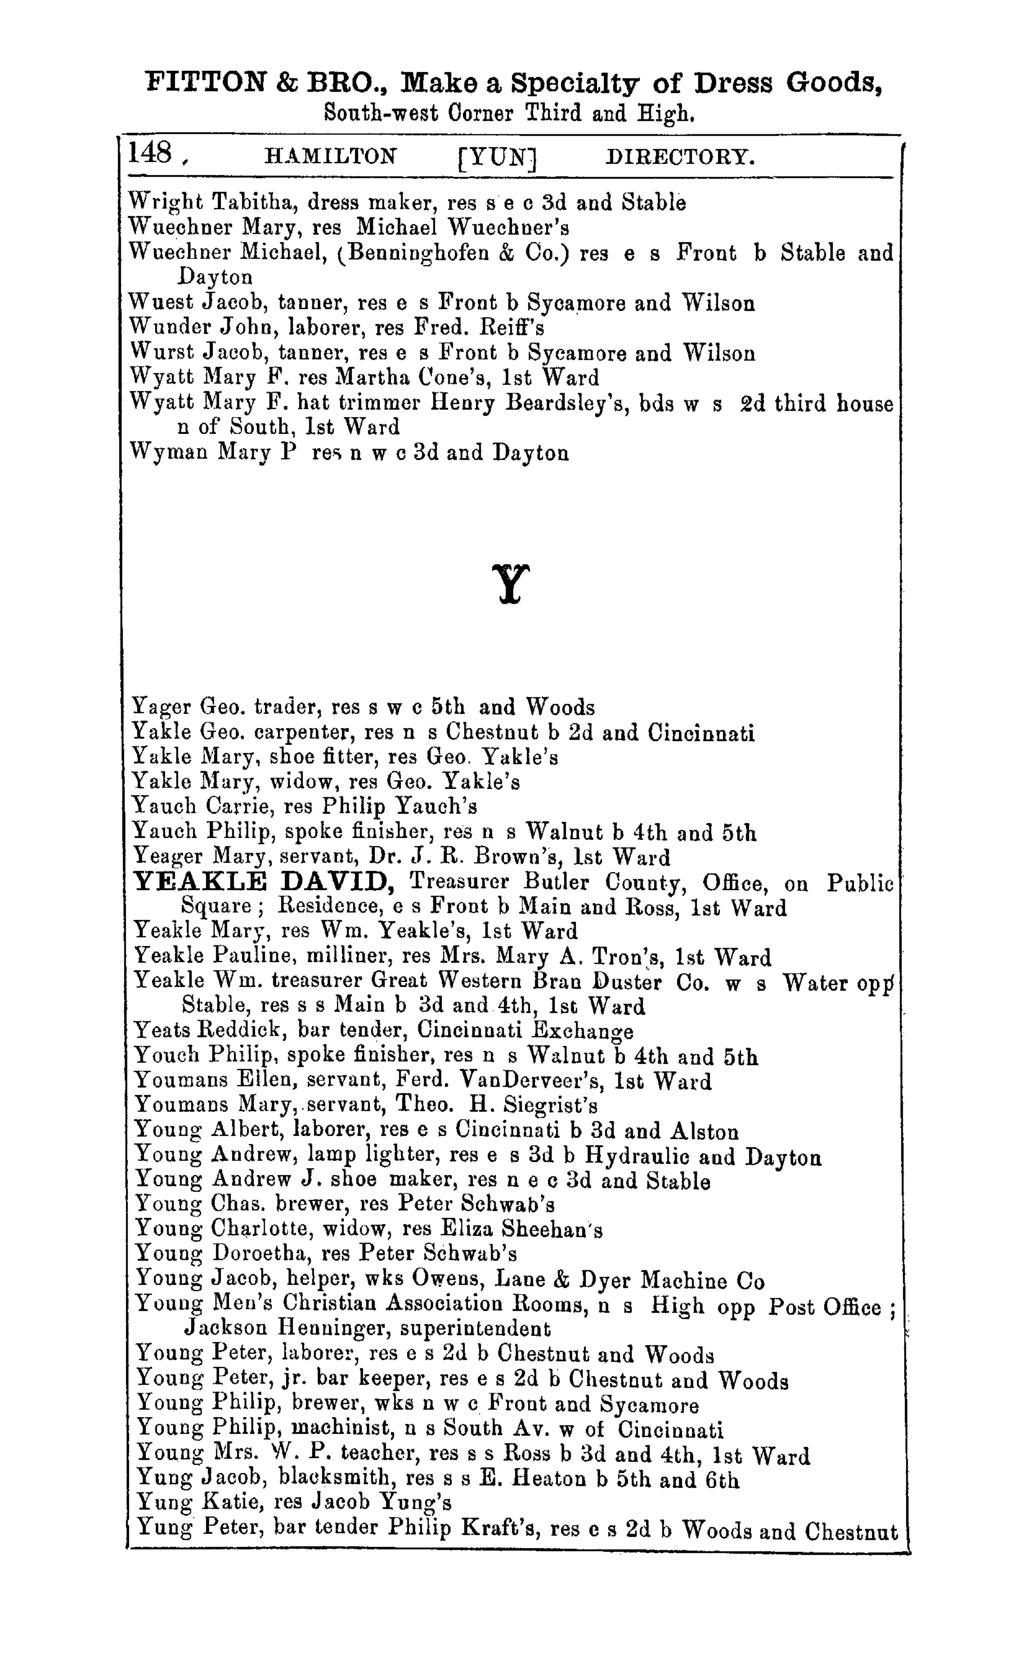 FITTON & BRO., Make a Specialty of Dress Goods, South-west Oorner Third and High. 148, HAMILTON [YUN] DIRECTORY.